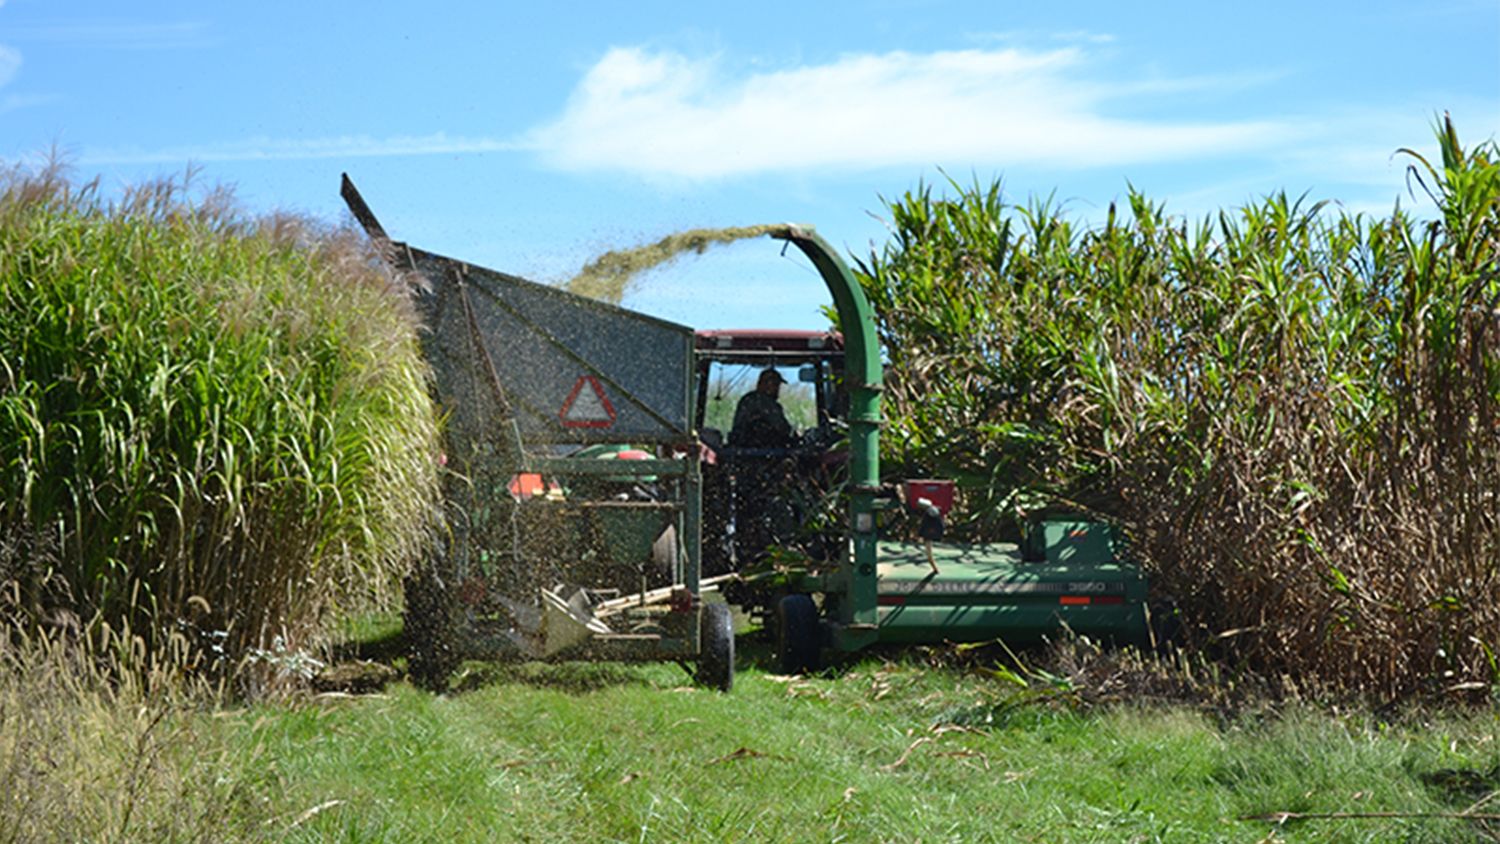 Machinery harvests miscanthus grass